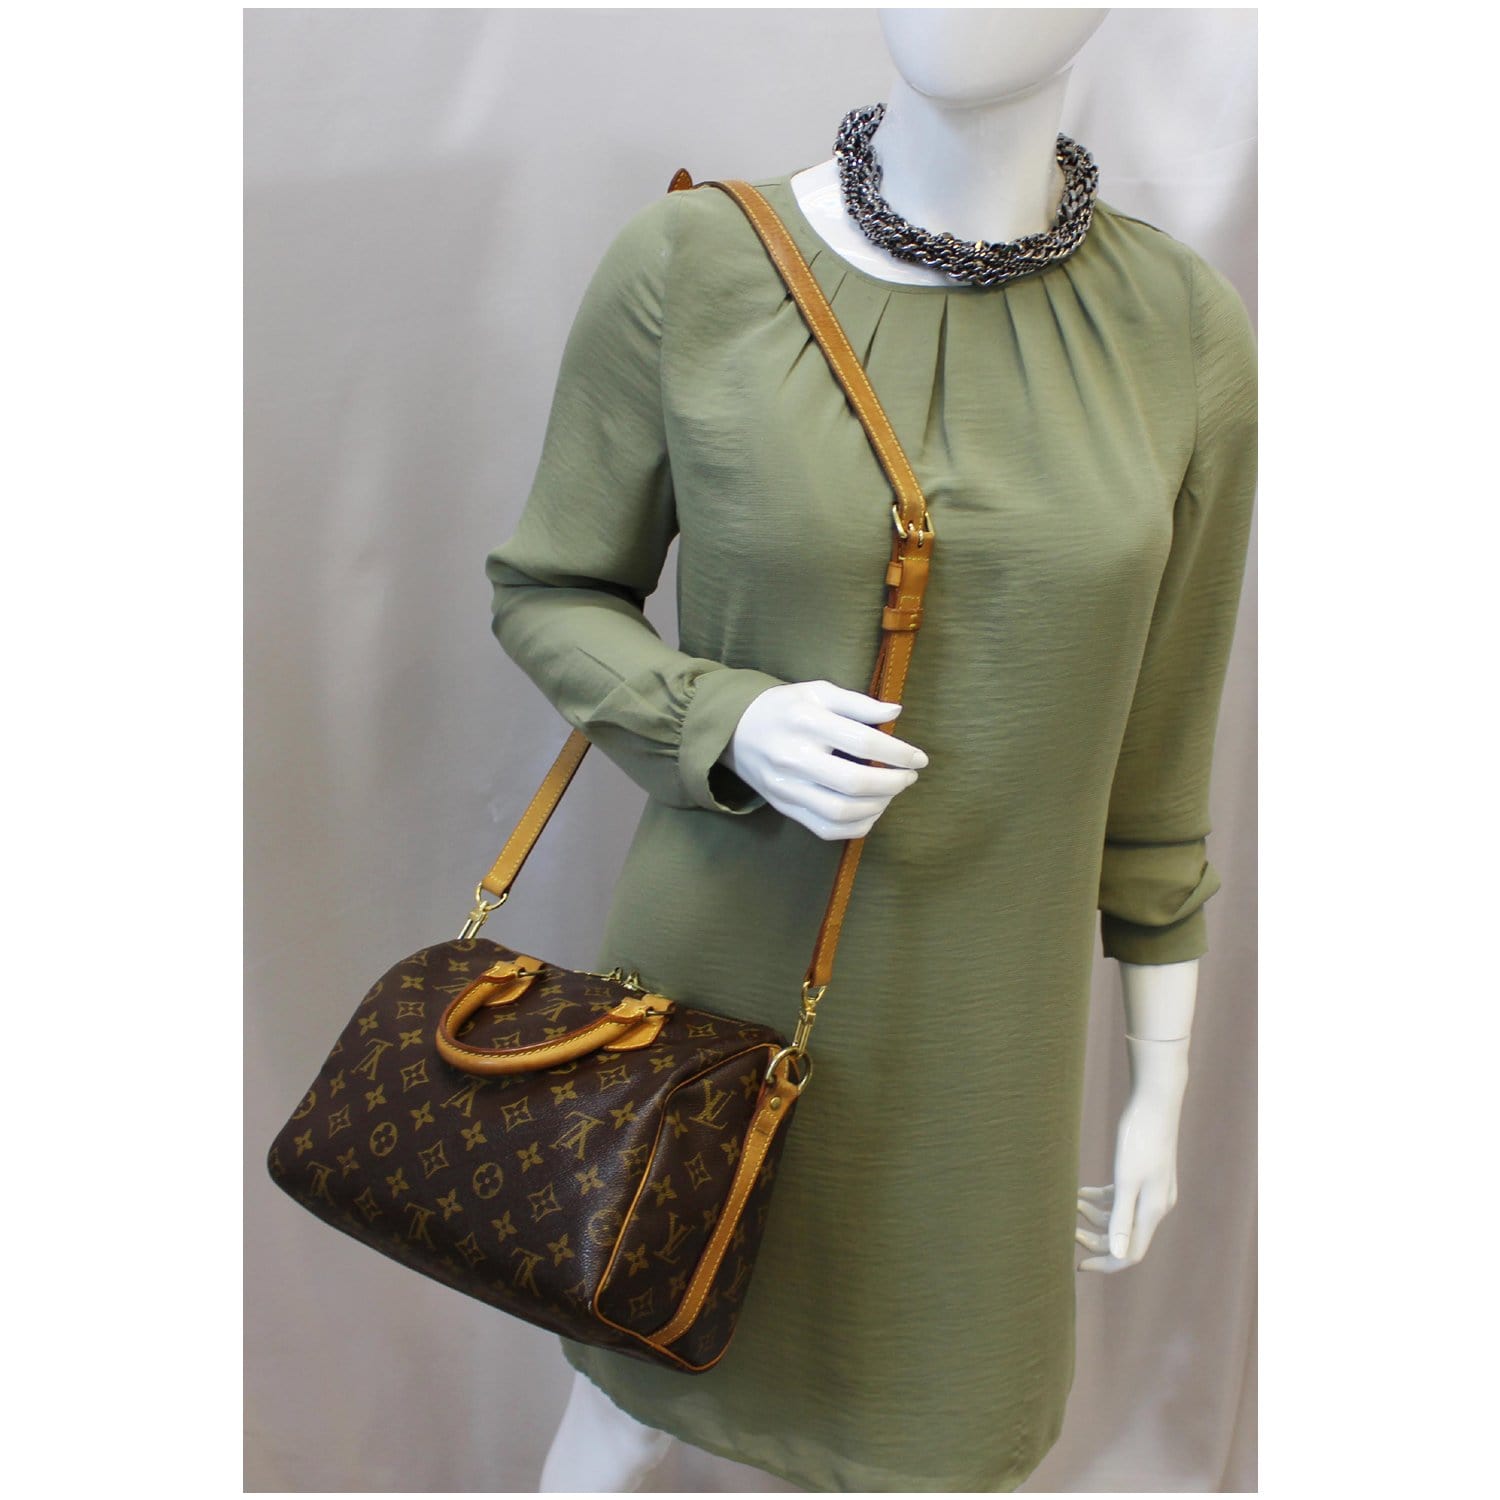 outfit speedy 25 bandouliere monogram